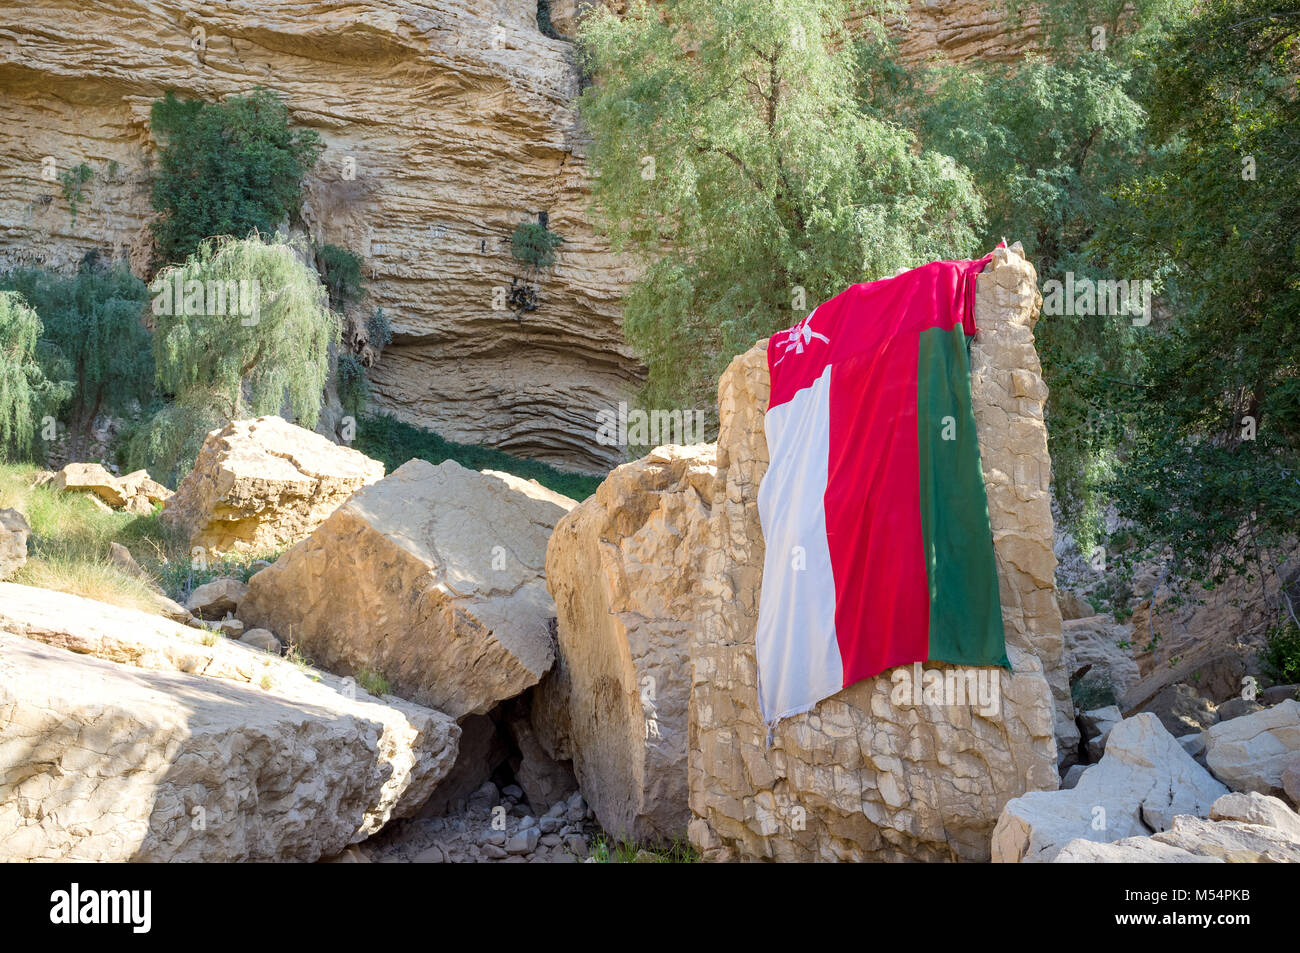 Flag of Oman. Flag is draped on a rock at Jebel Qatar (known as Hanging Gardens) close to Buraimi in Oman on the border with Al Ain and Abu Dhabi Stock Photo